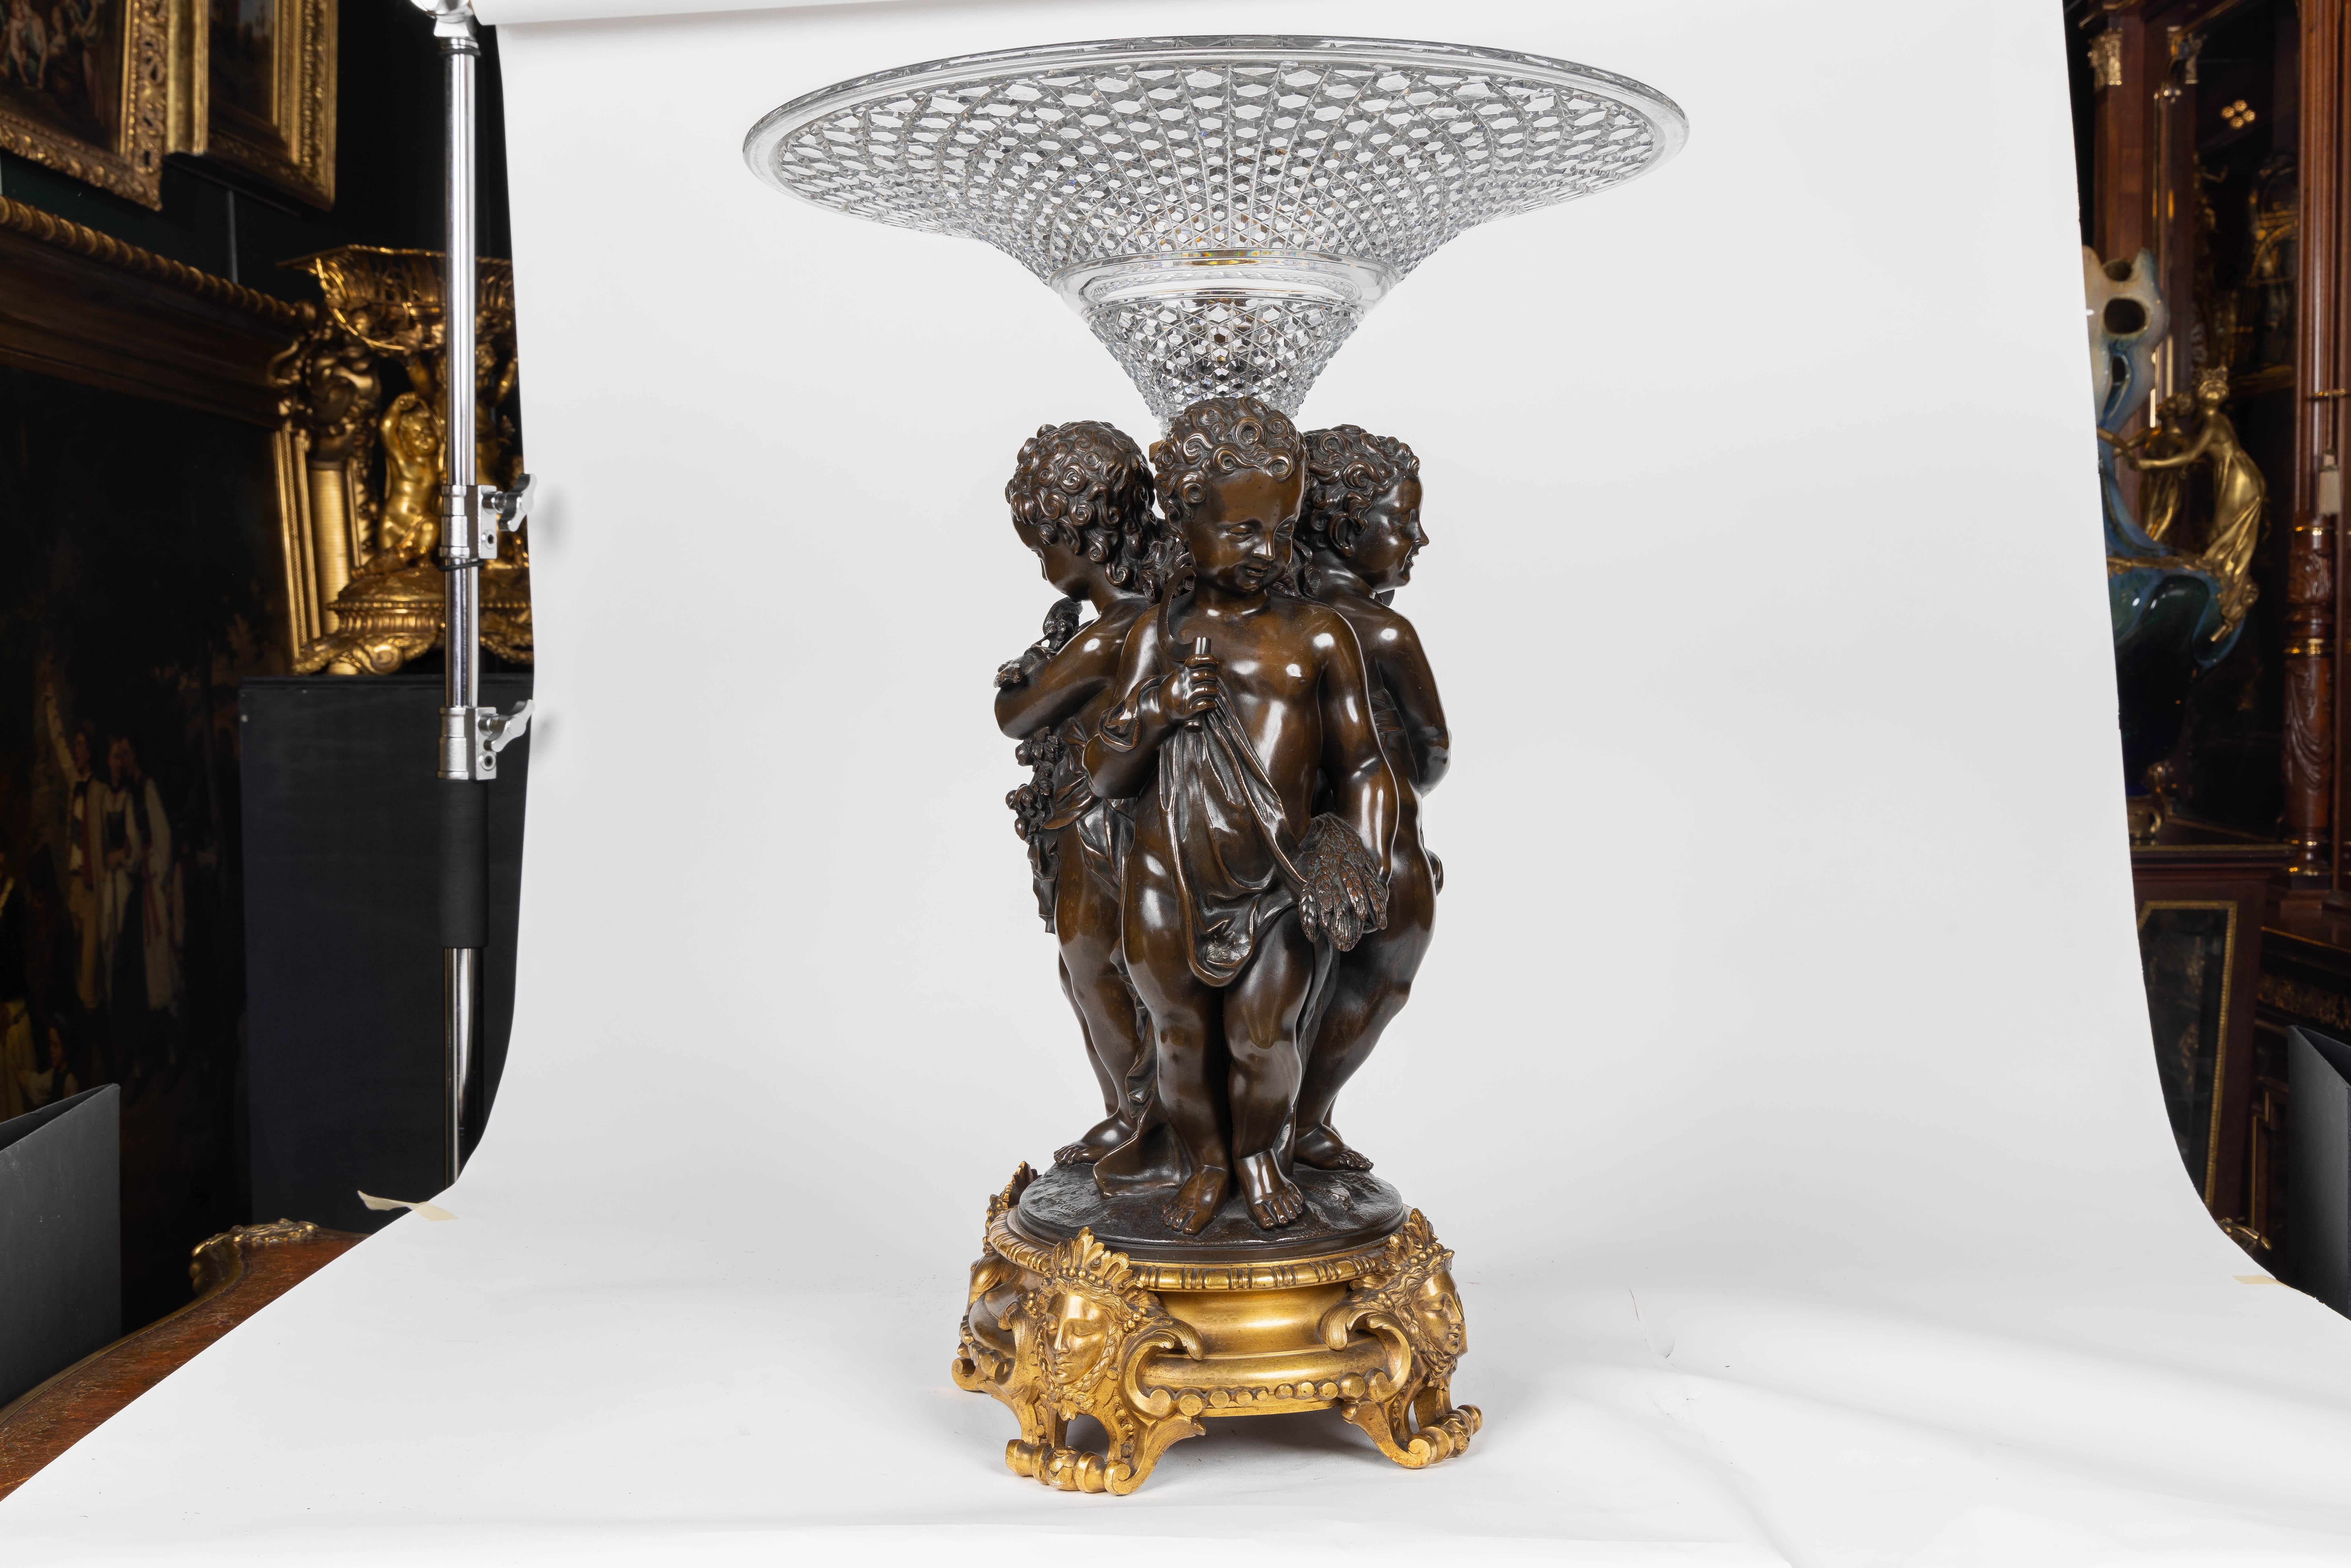 19th Century Mathurin Moreau, A Monumental French Bronze and Crystal Figural Centerpiece For Sale